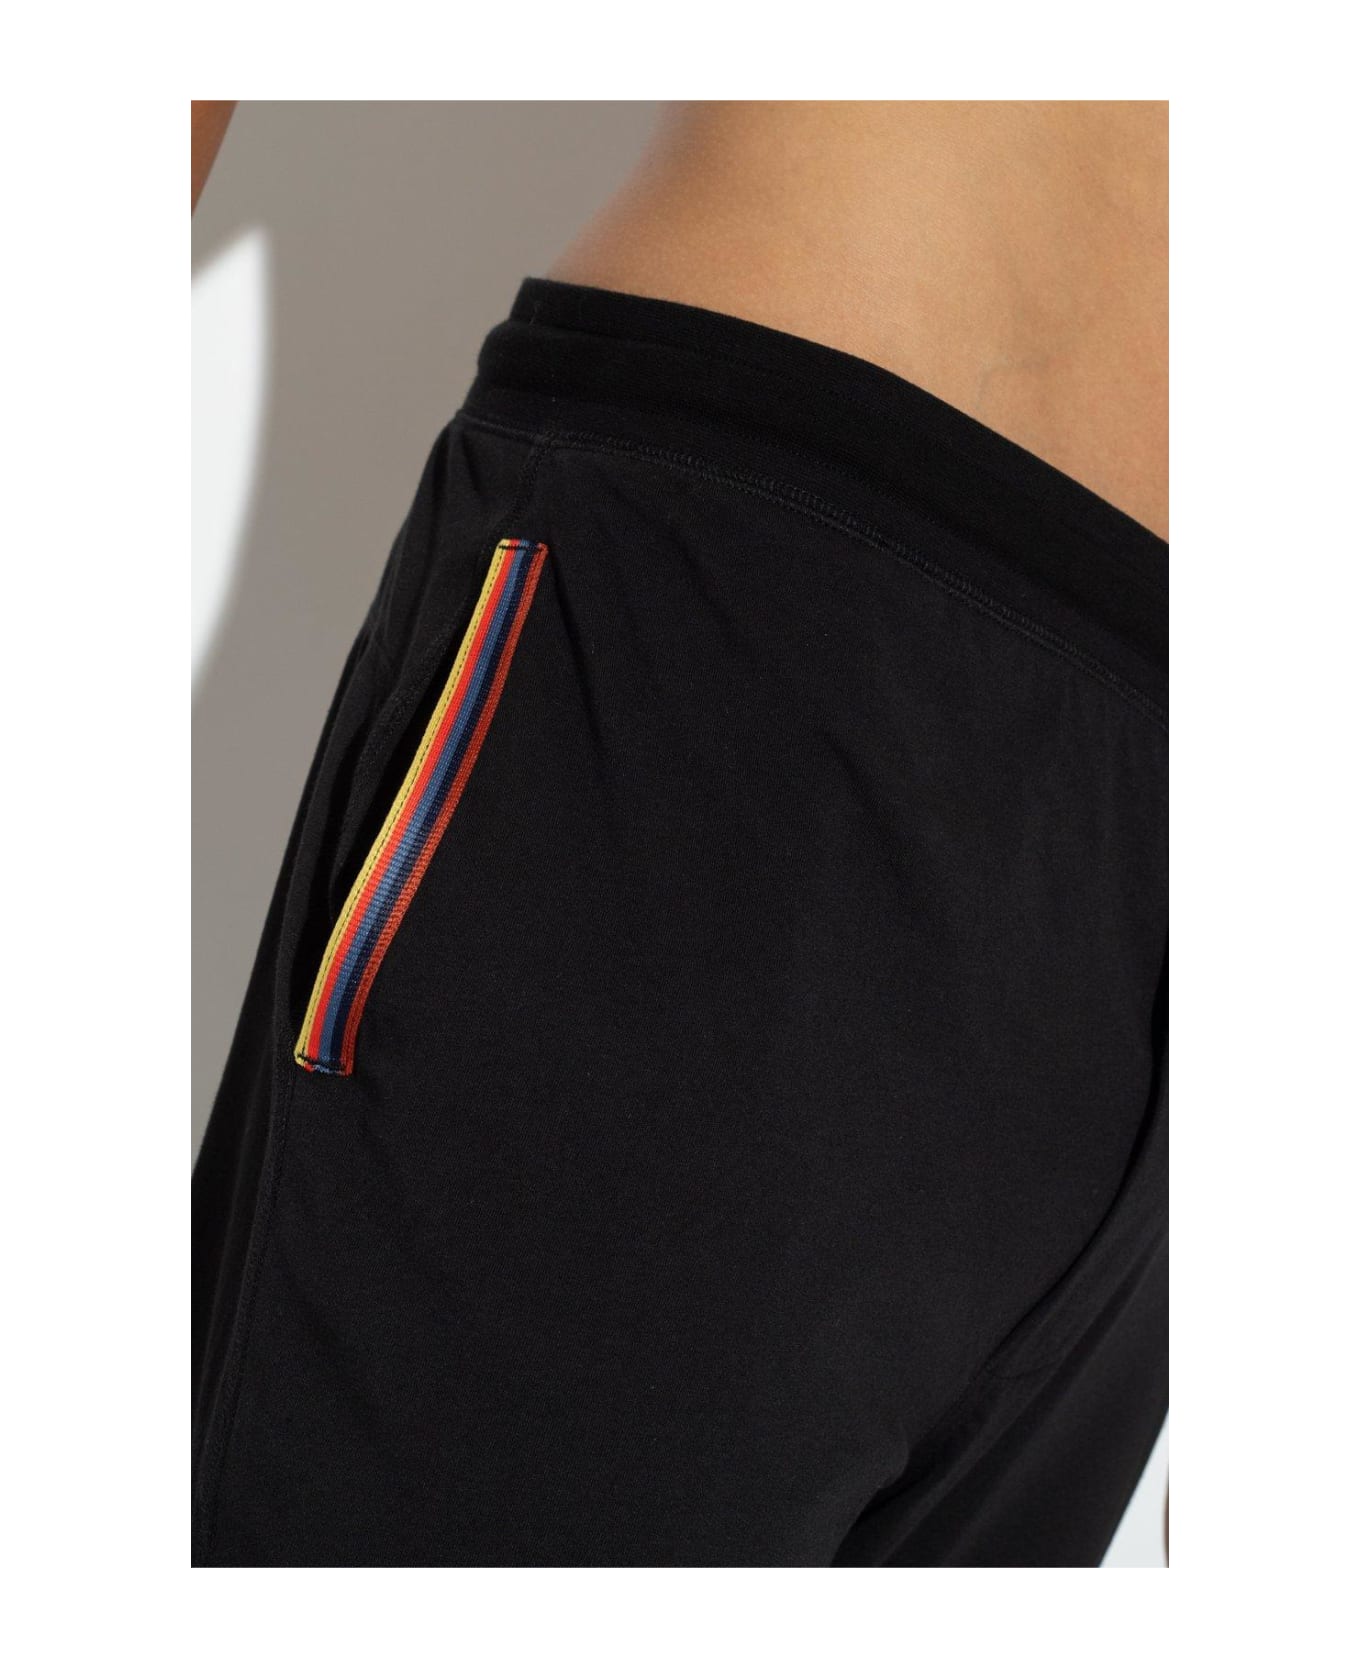 Paul Smith Sweatpants With Pockets - Black ボトムス